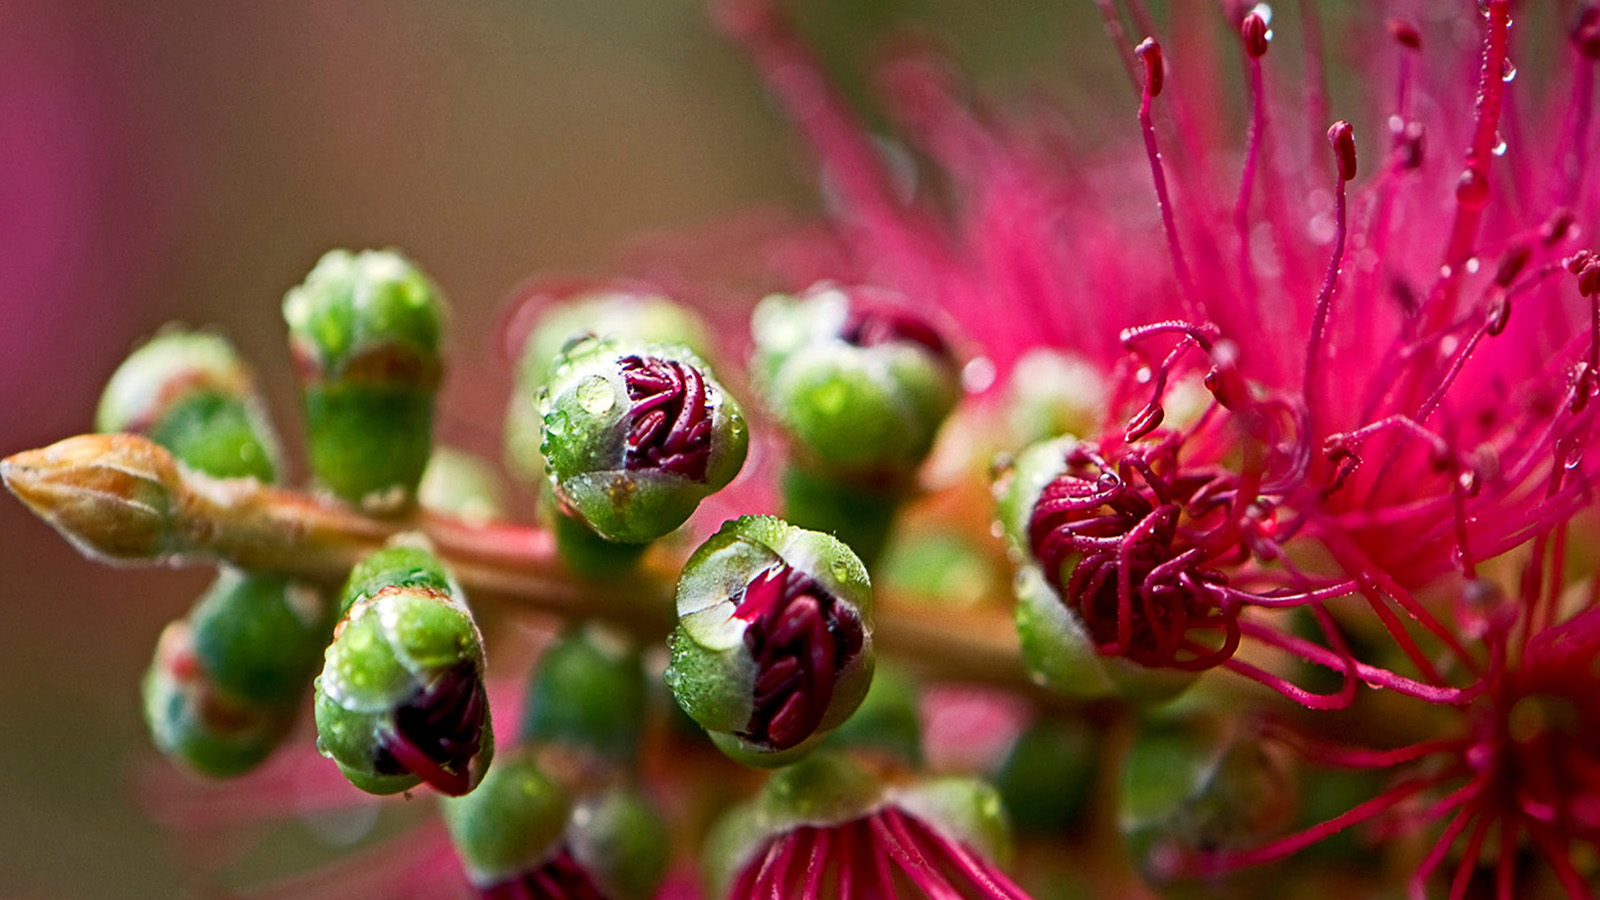 Flora: Pink flower and seed pods